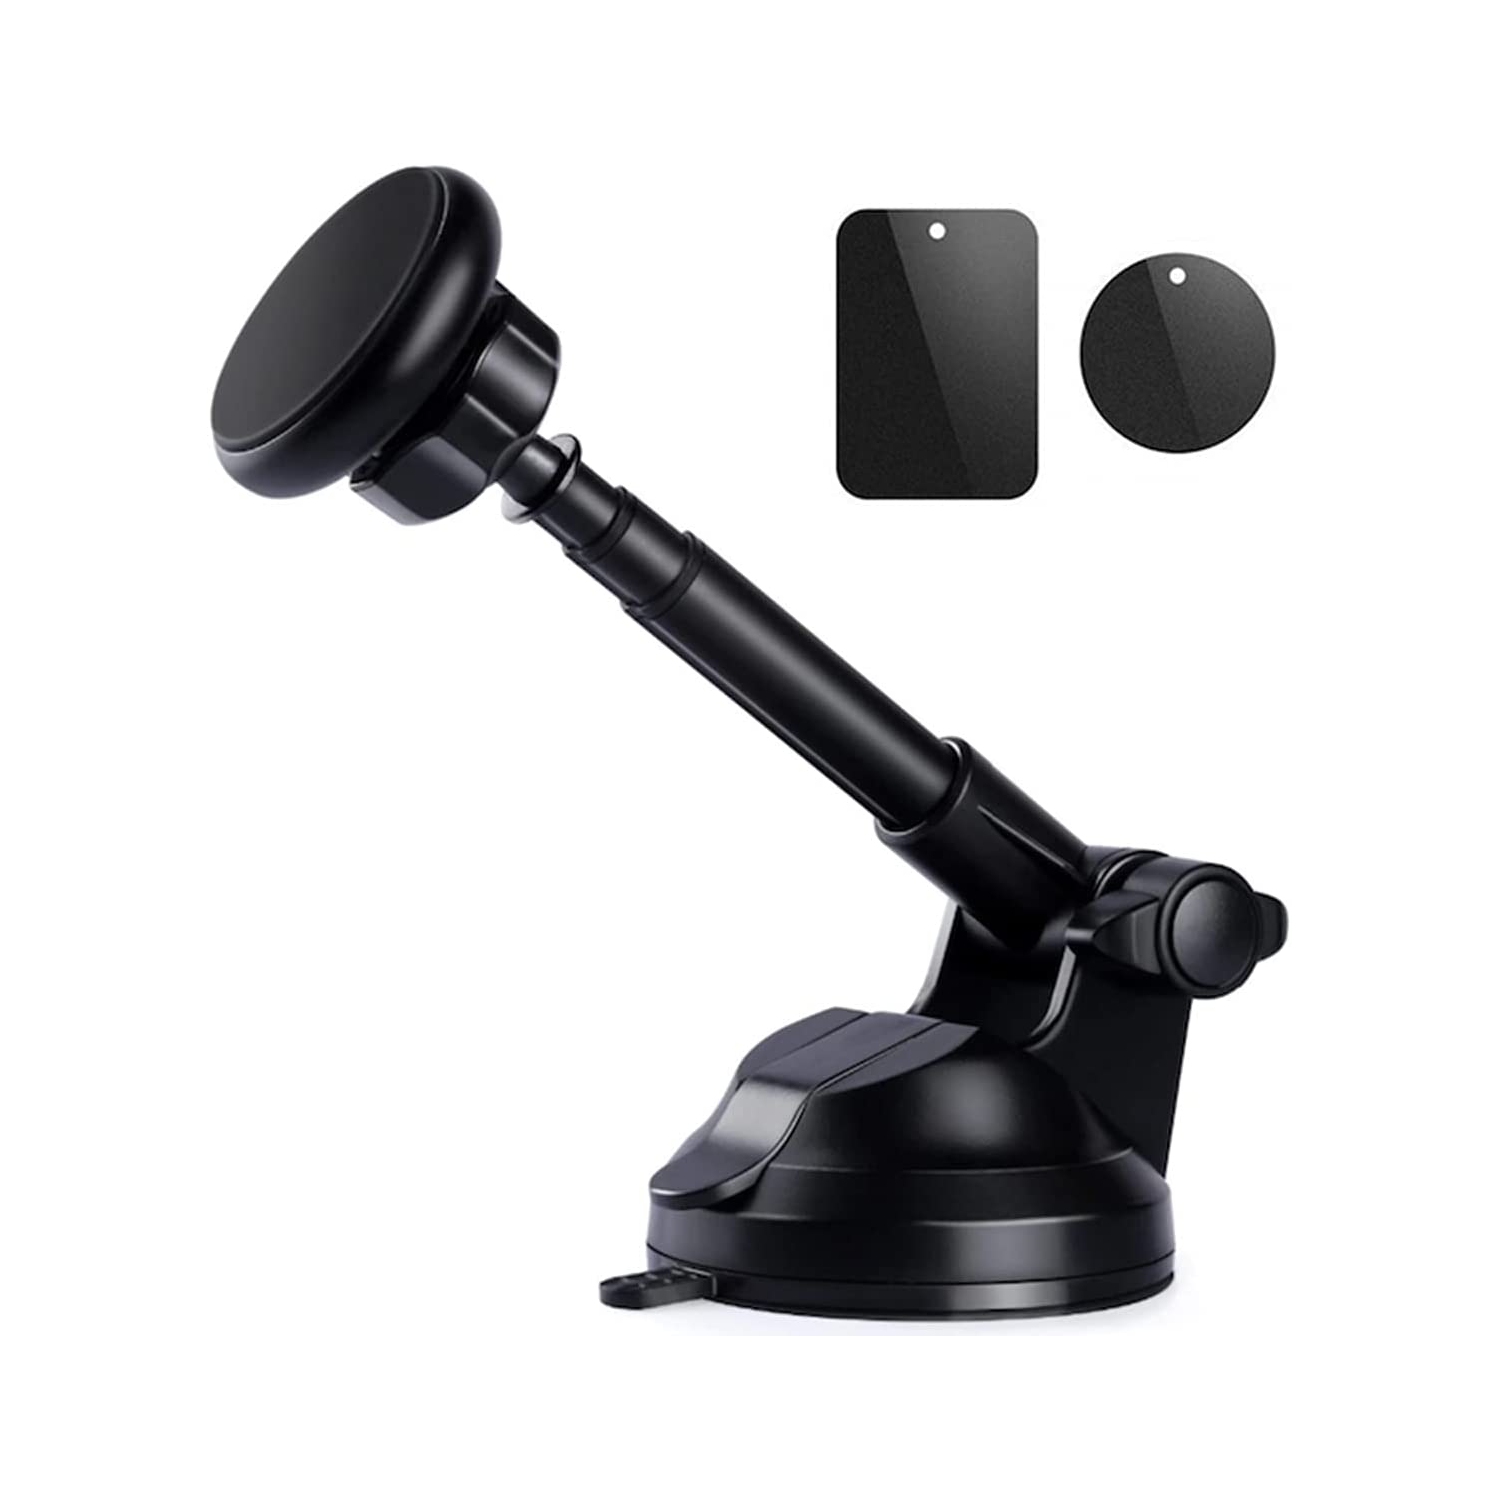 Universal Car Phone Mount, Magnetic Phone Holder for Car Windshield Dashboard, Powerful Suction Cup with Adjustable Telescopic Arm, 6 Strong Magnets Compatible for All Smar